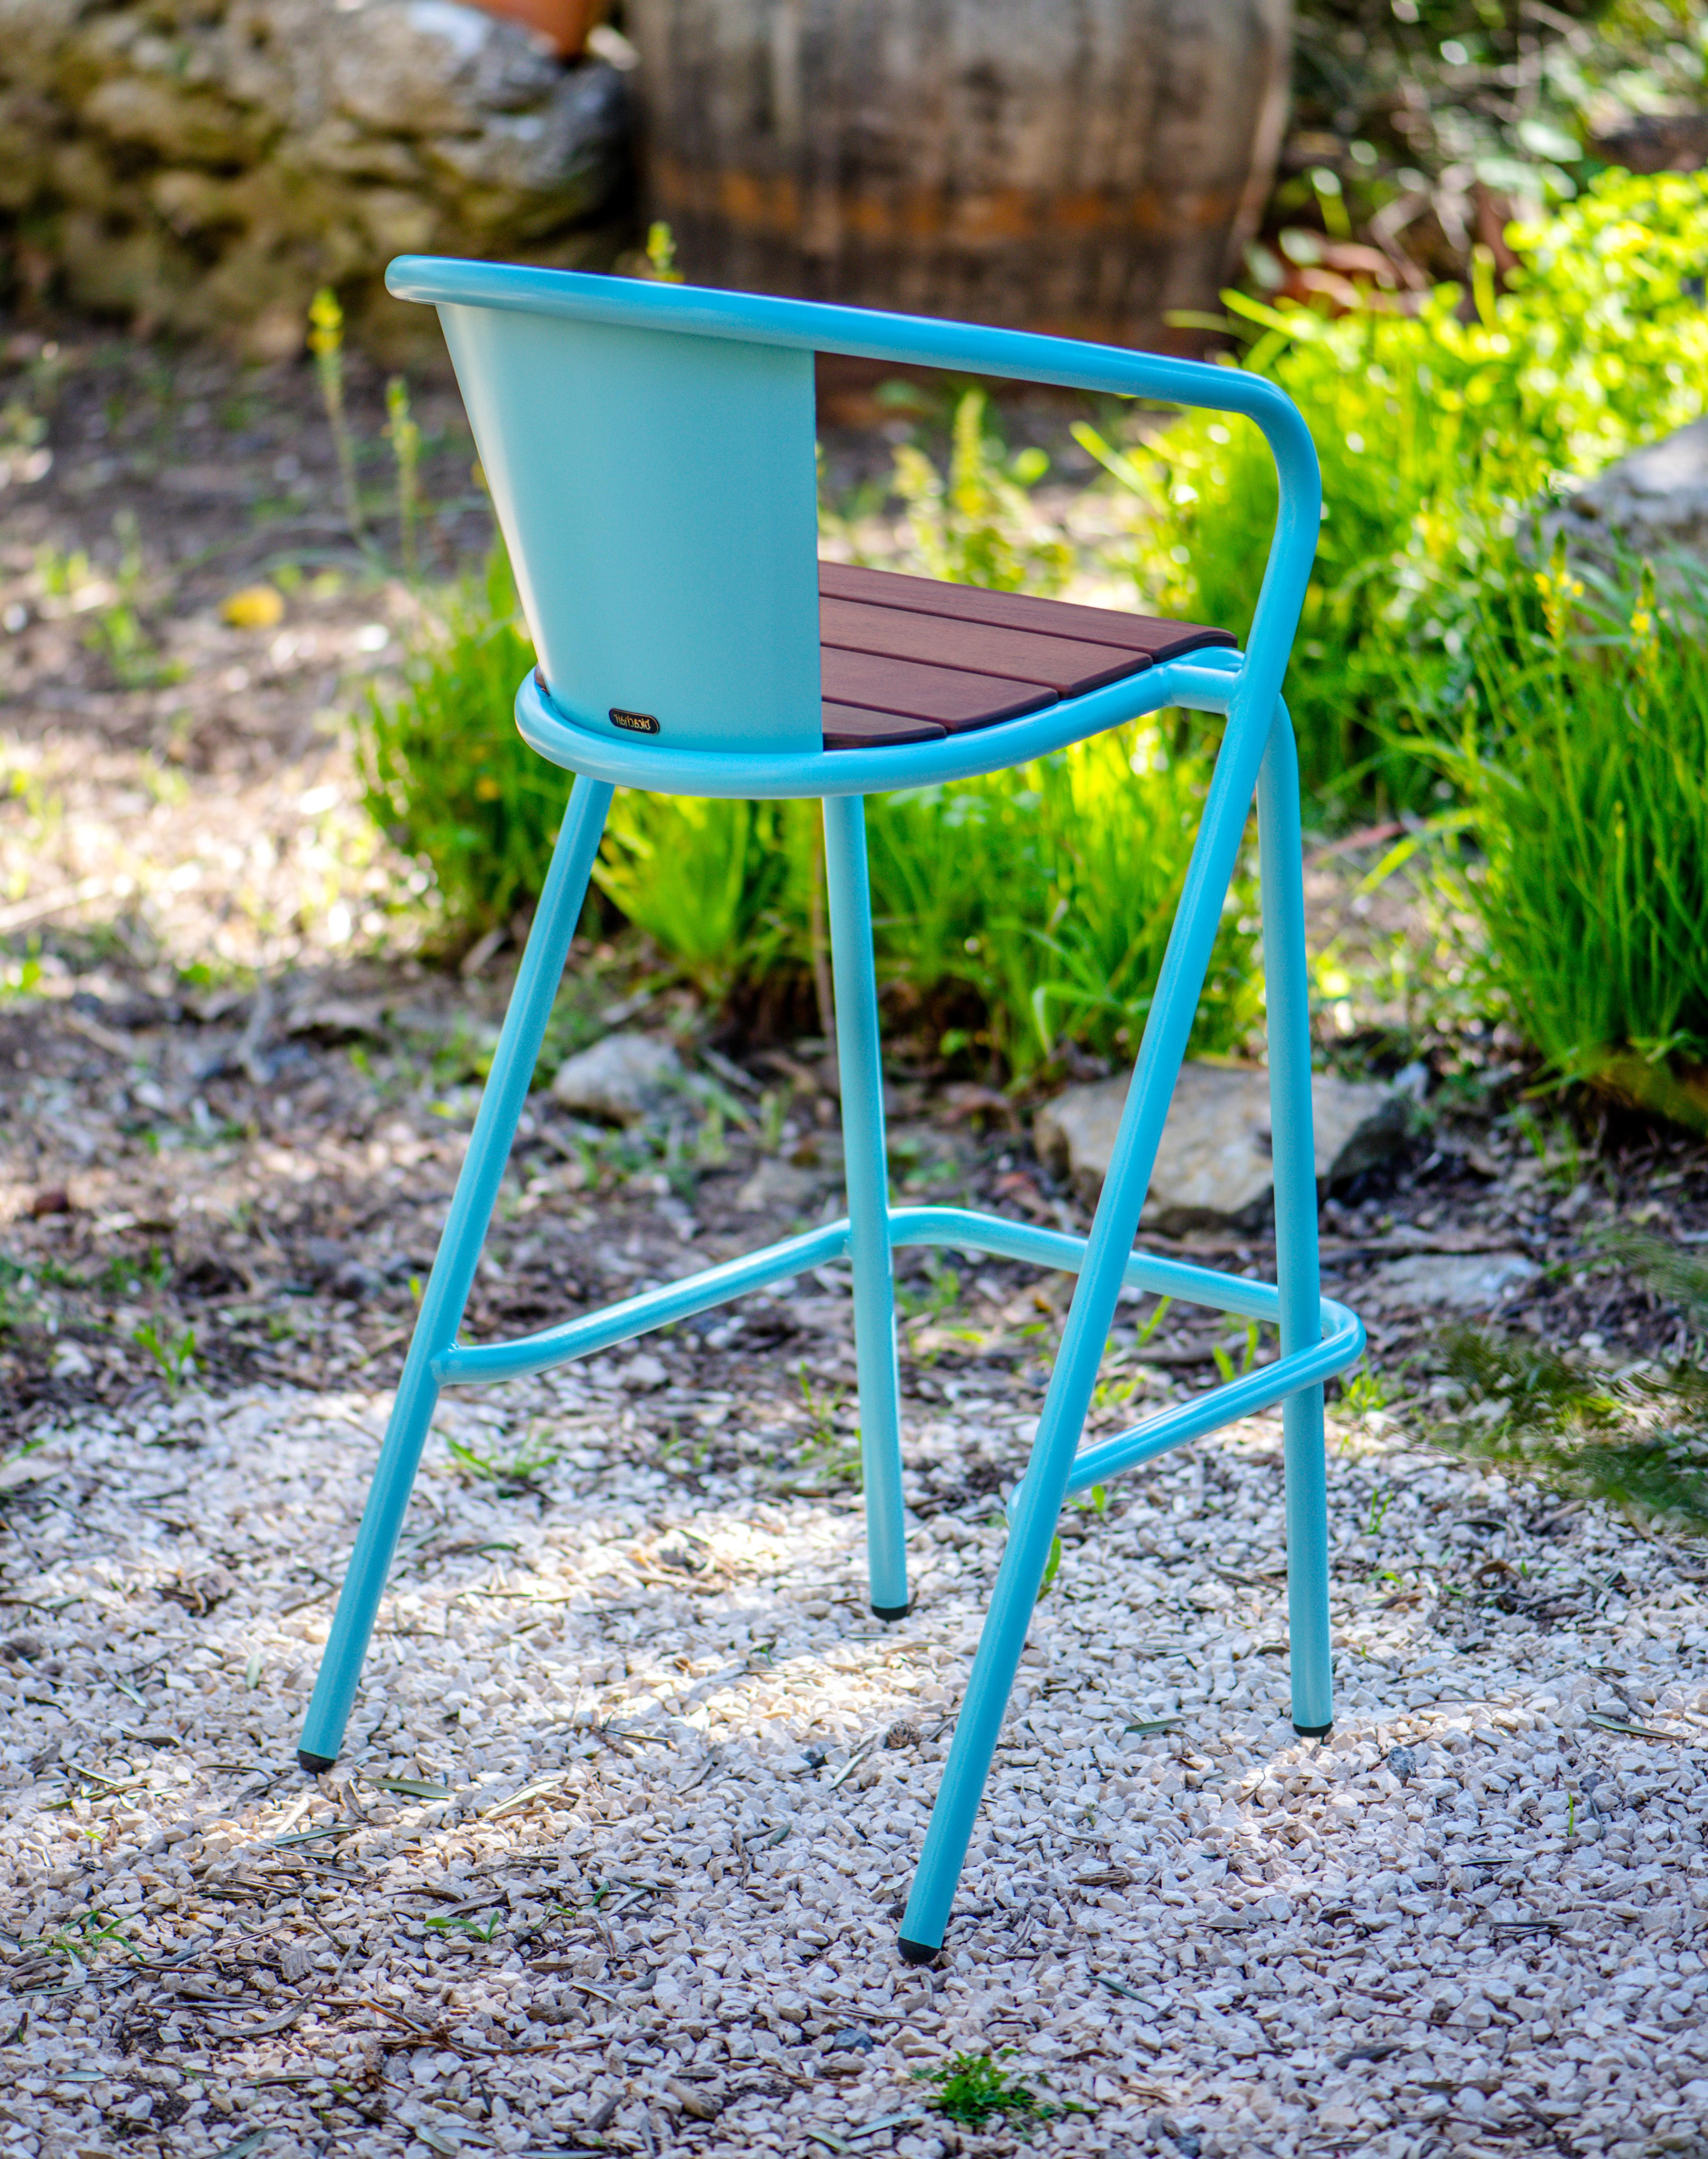 BICAstool is a sustainable stackable steel high stool chair made for the outdoors from recycled and recyclable steel and finished with our premium selection of powder-coating colors, in this case in a pastel Turquoise color, that transforms a